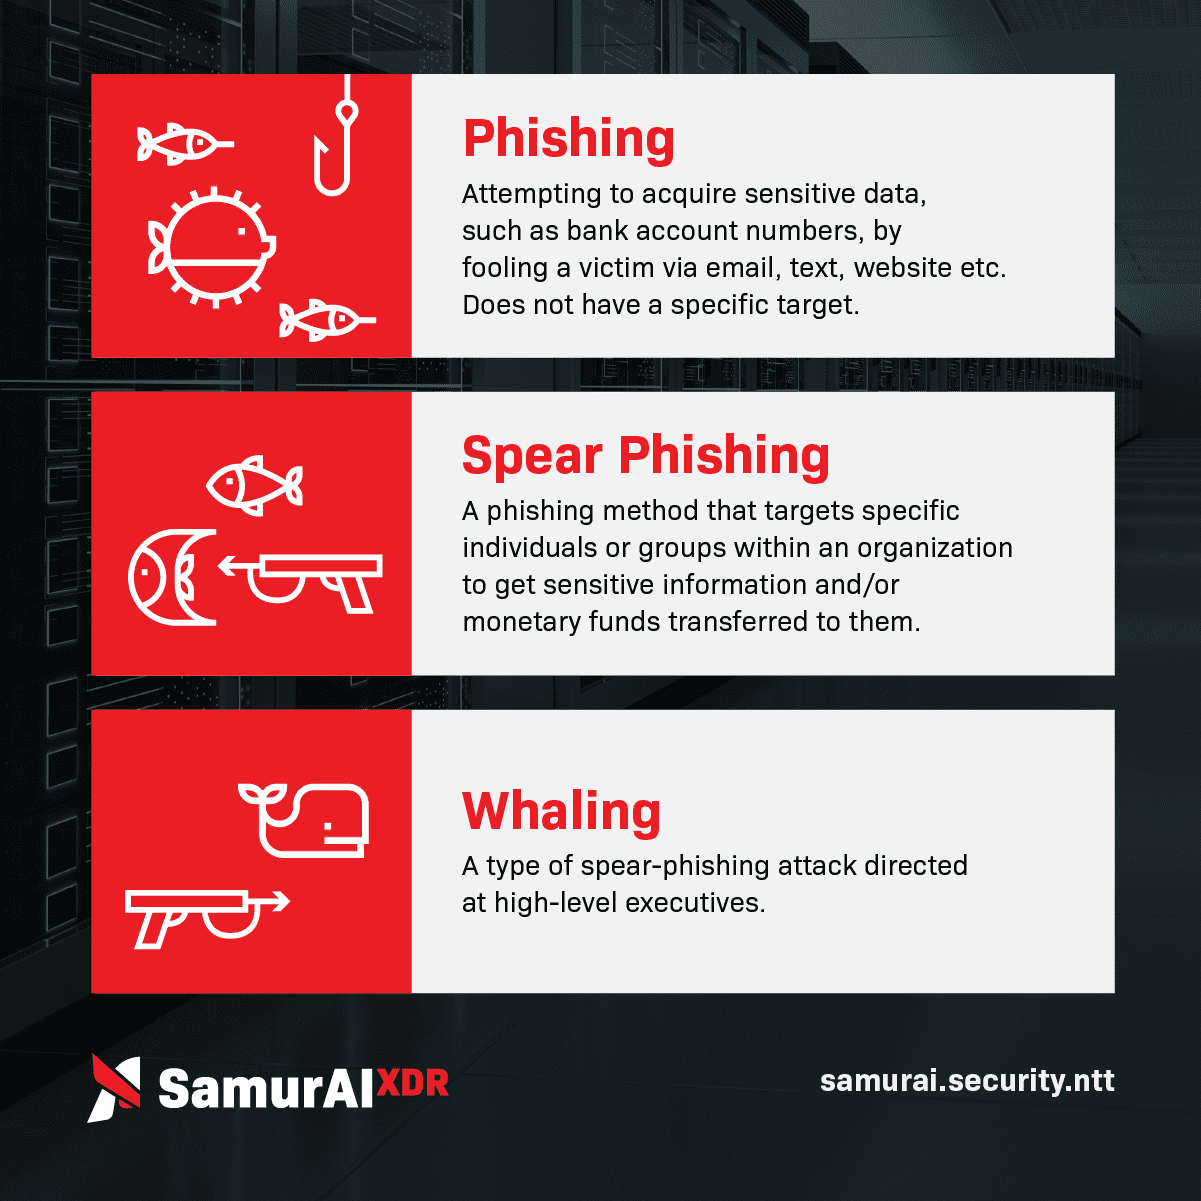 How Whaling Differs from Generic Phishing